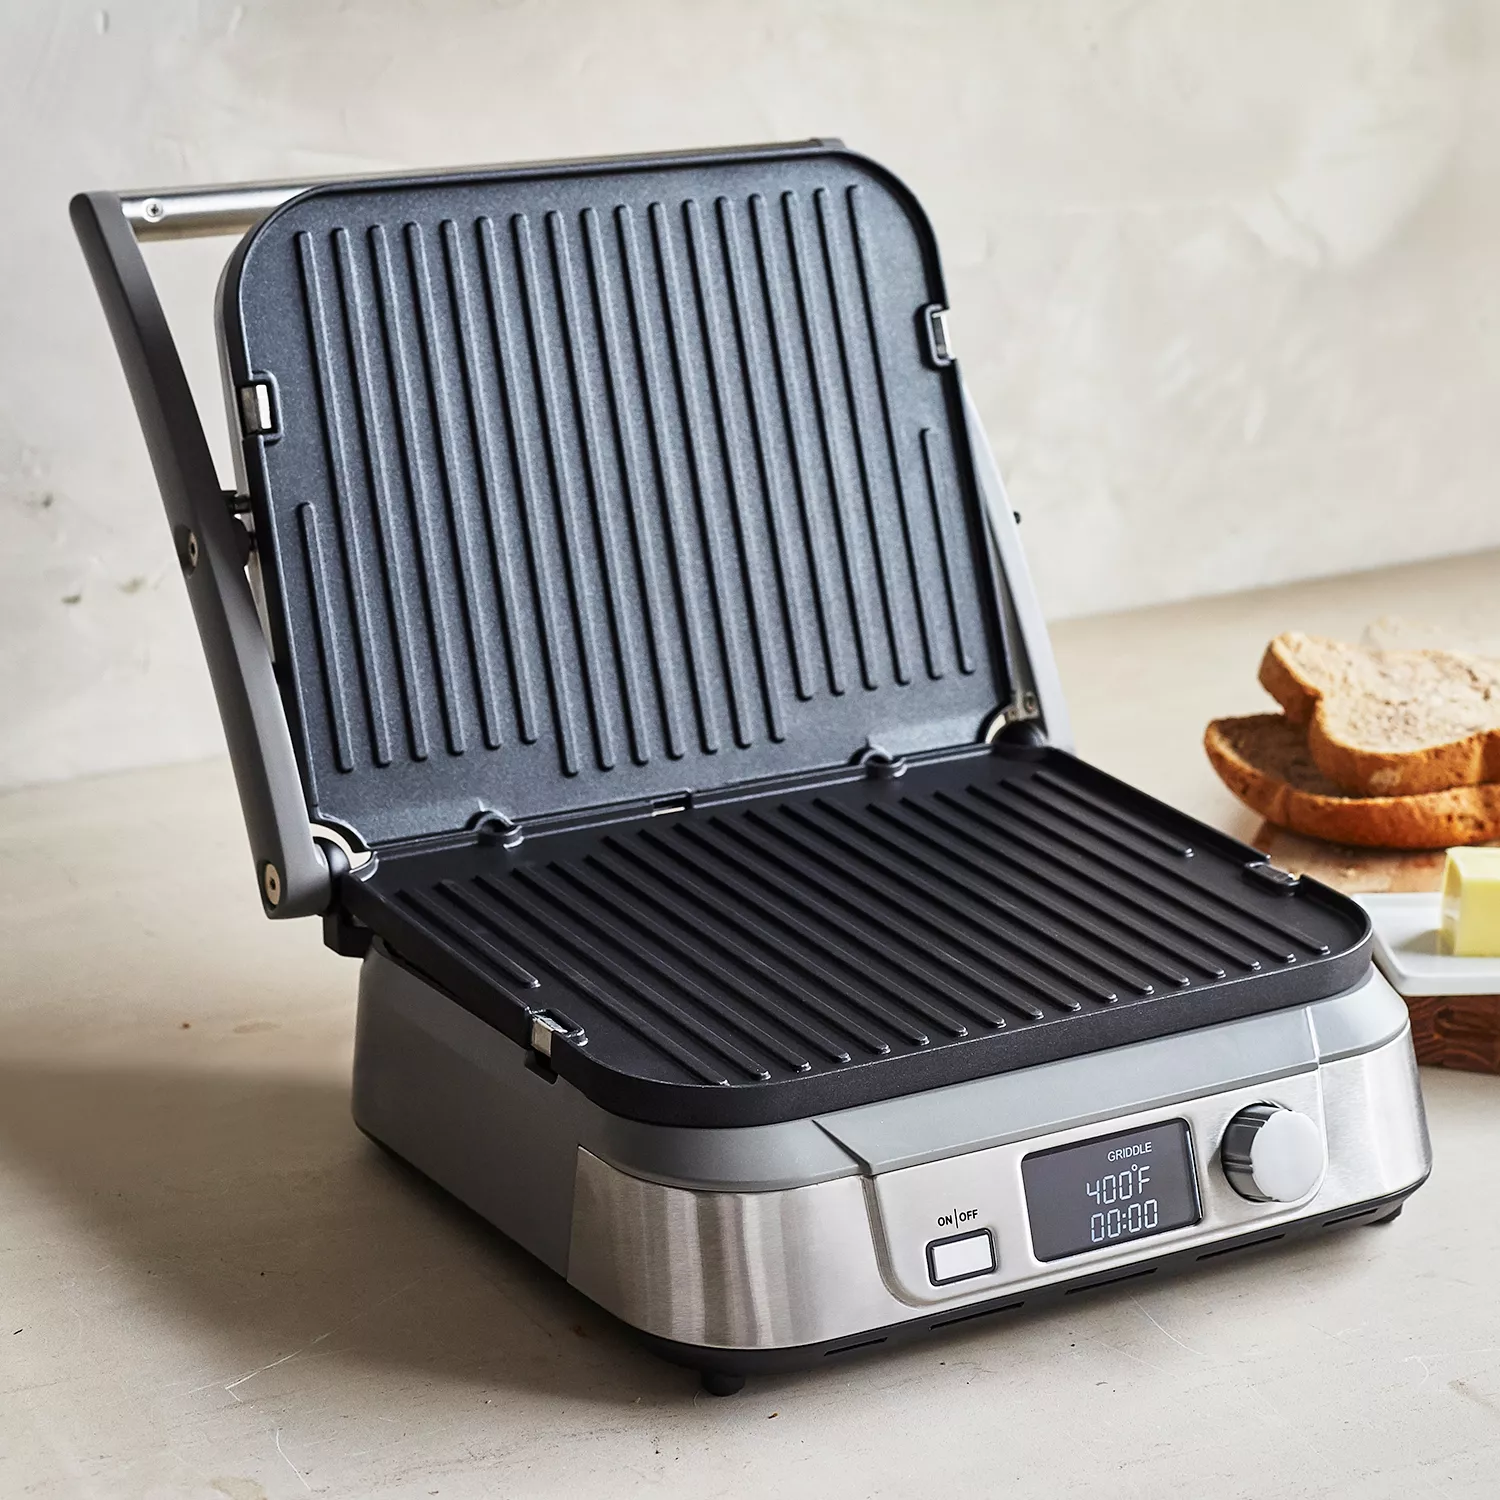 Grab the Cuisinart Griddler 3-in-1 Grill and Panini Press now